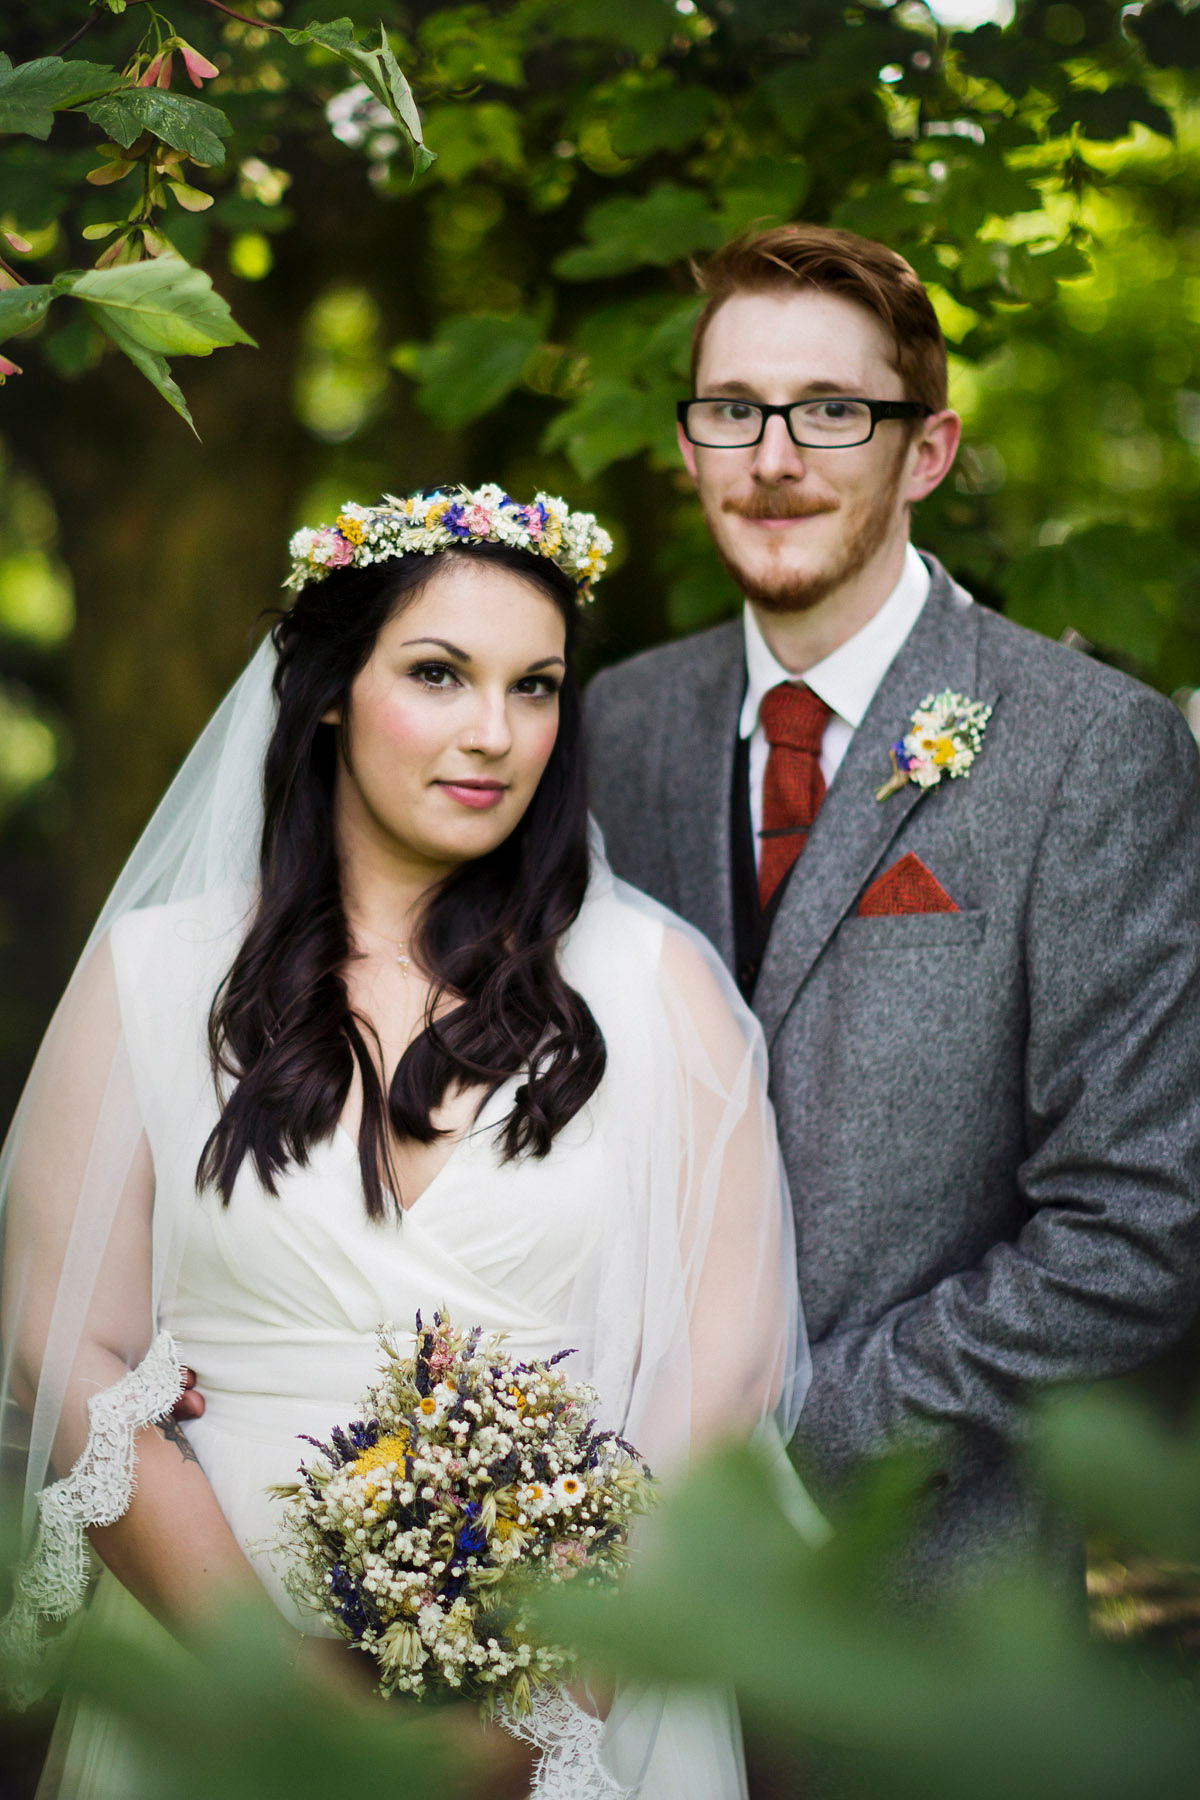 Etsy illustrator Kerris wore an ASOS wedding dress for her boho and handmade village hall wedding. We love the comic book confetti! Photography by Mark Tattersall.